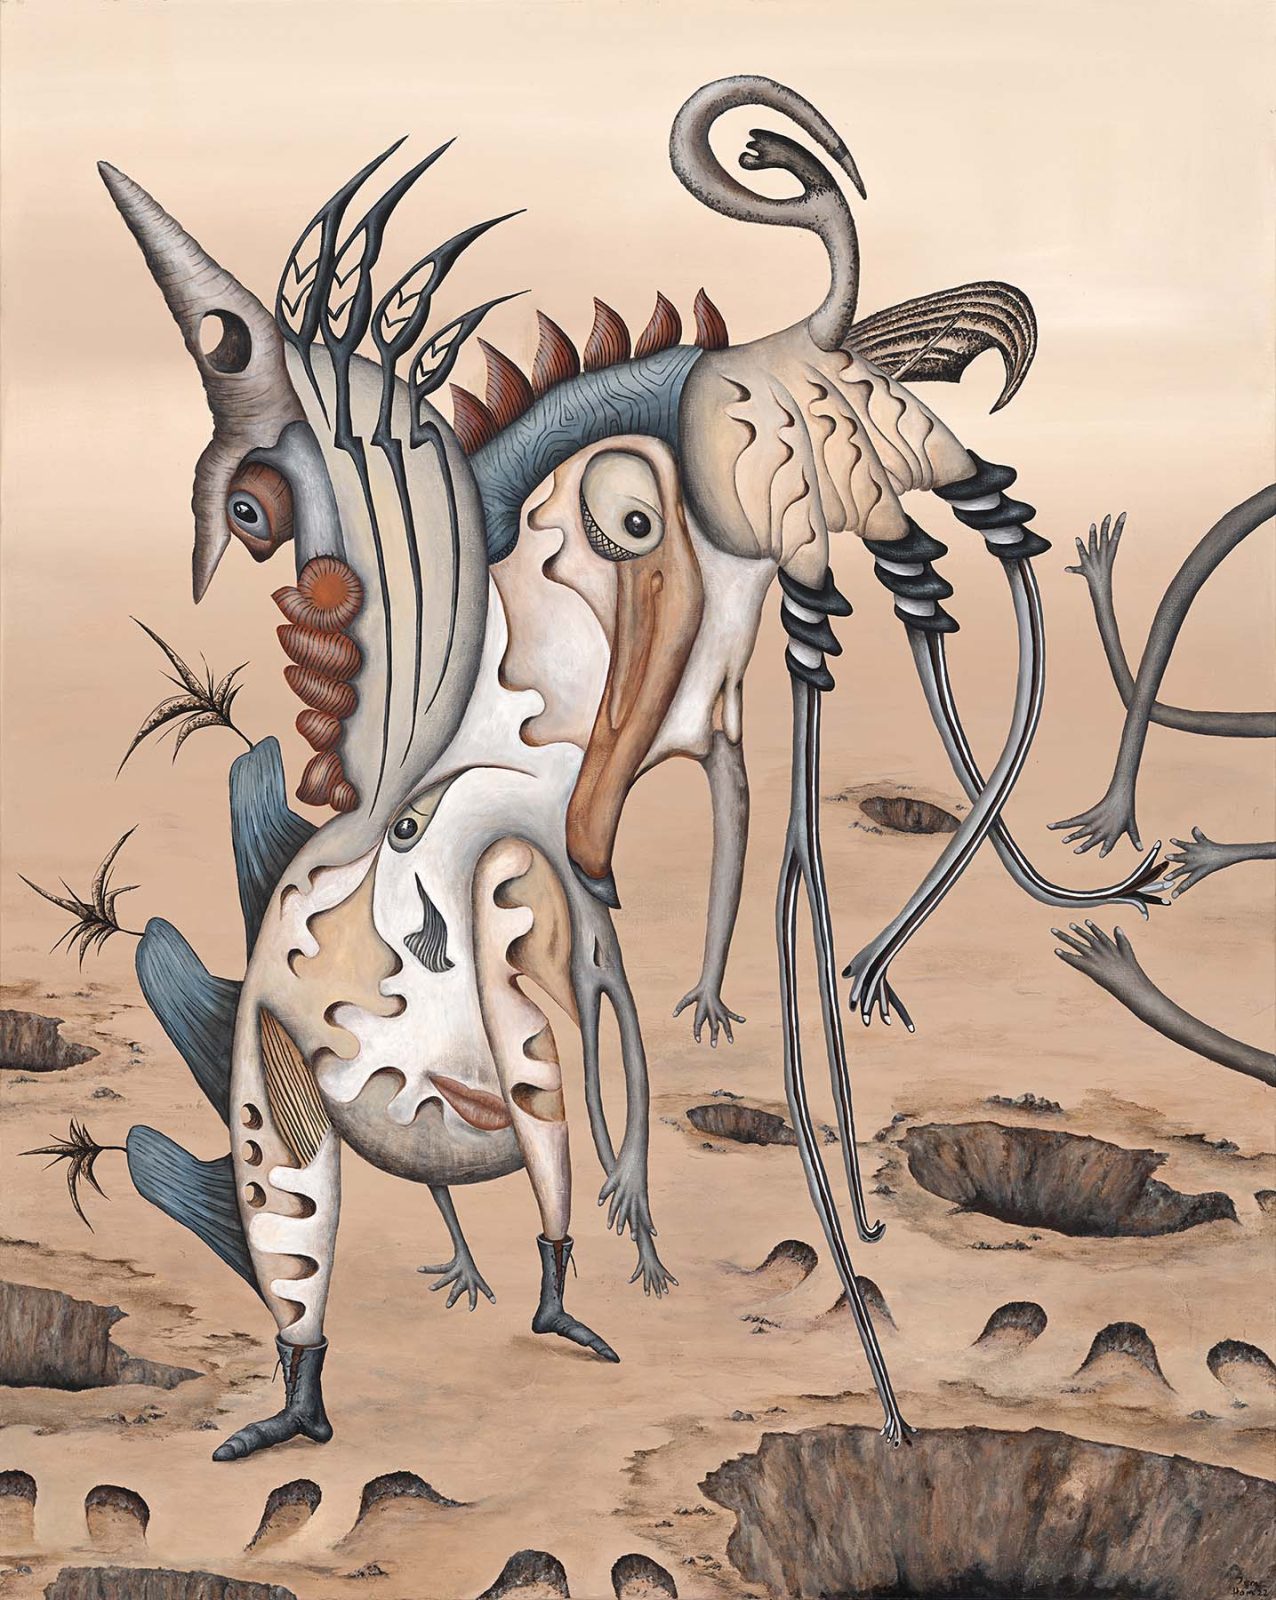 Surrealist painting of an imaginary creature with lots of arms walking through a desert landscape of craters